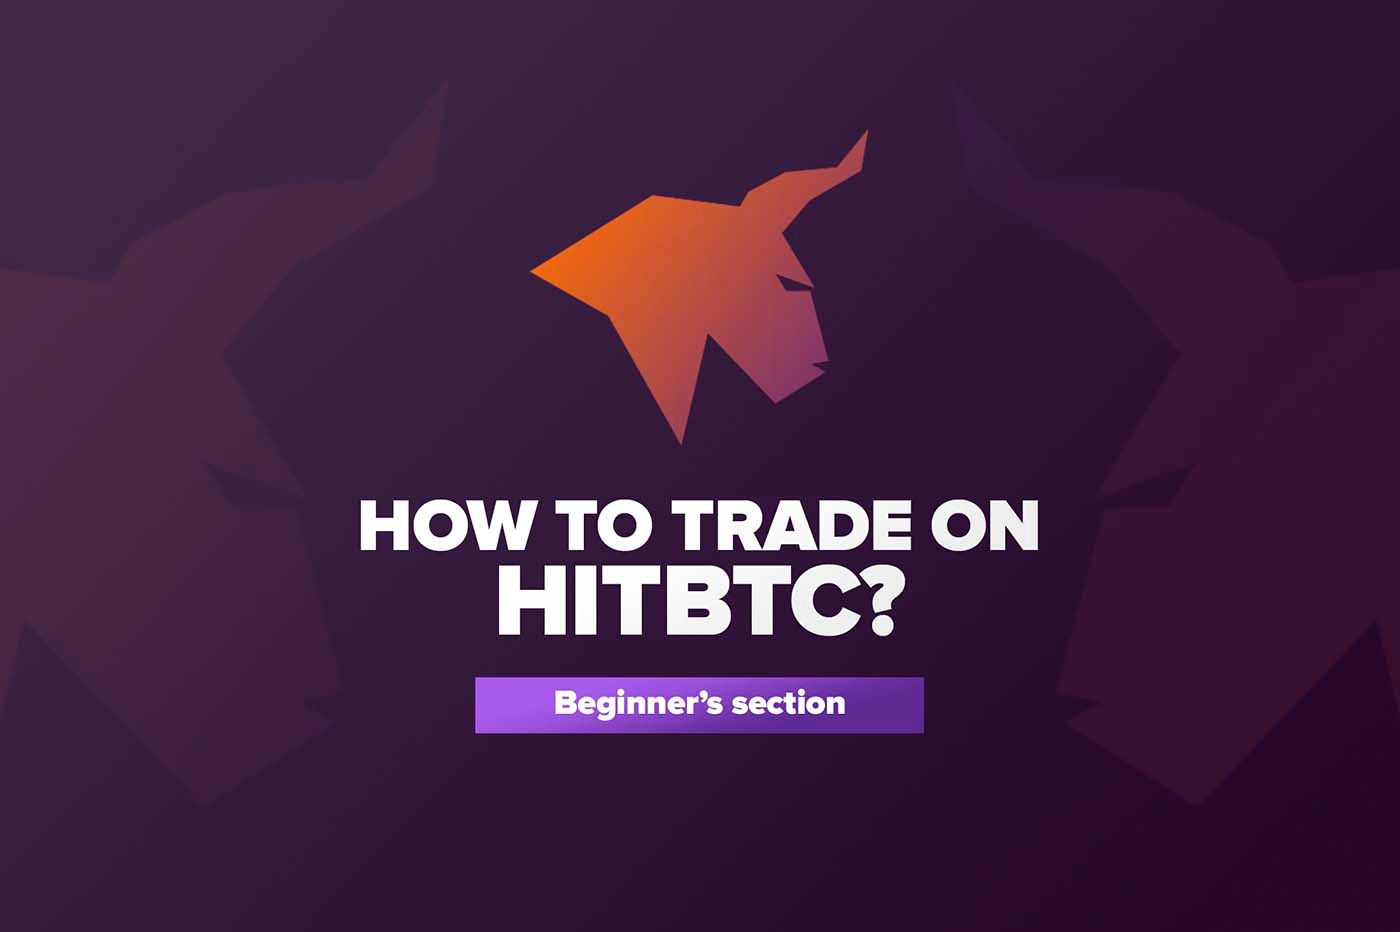 How to trade on HITBTC?